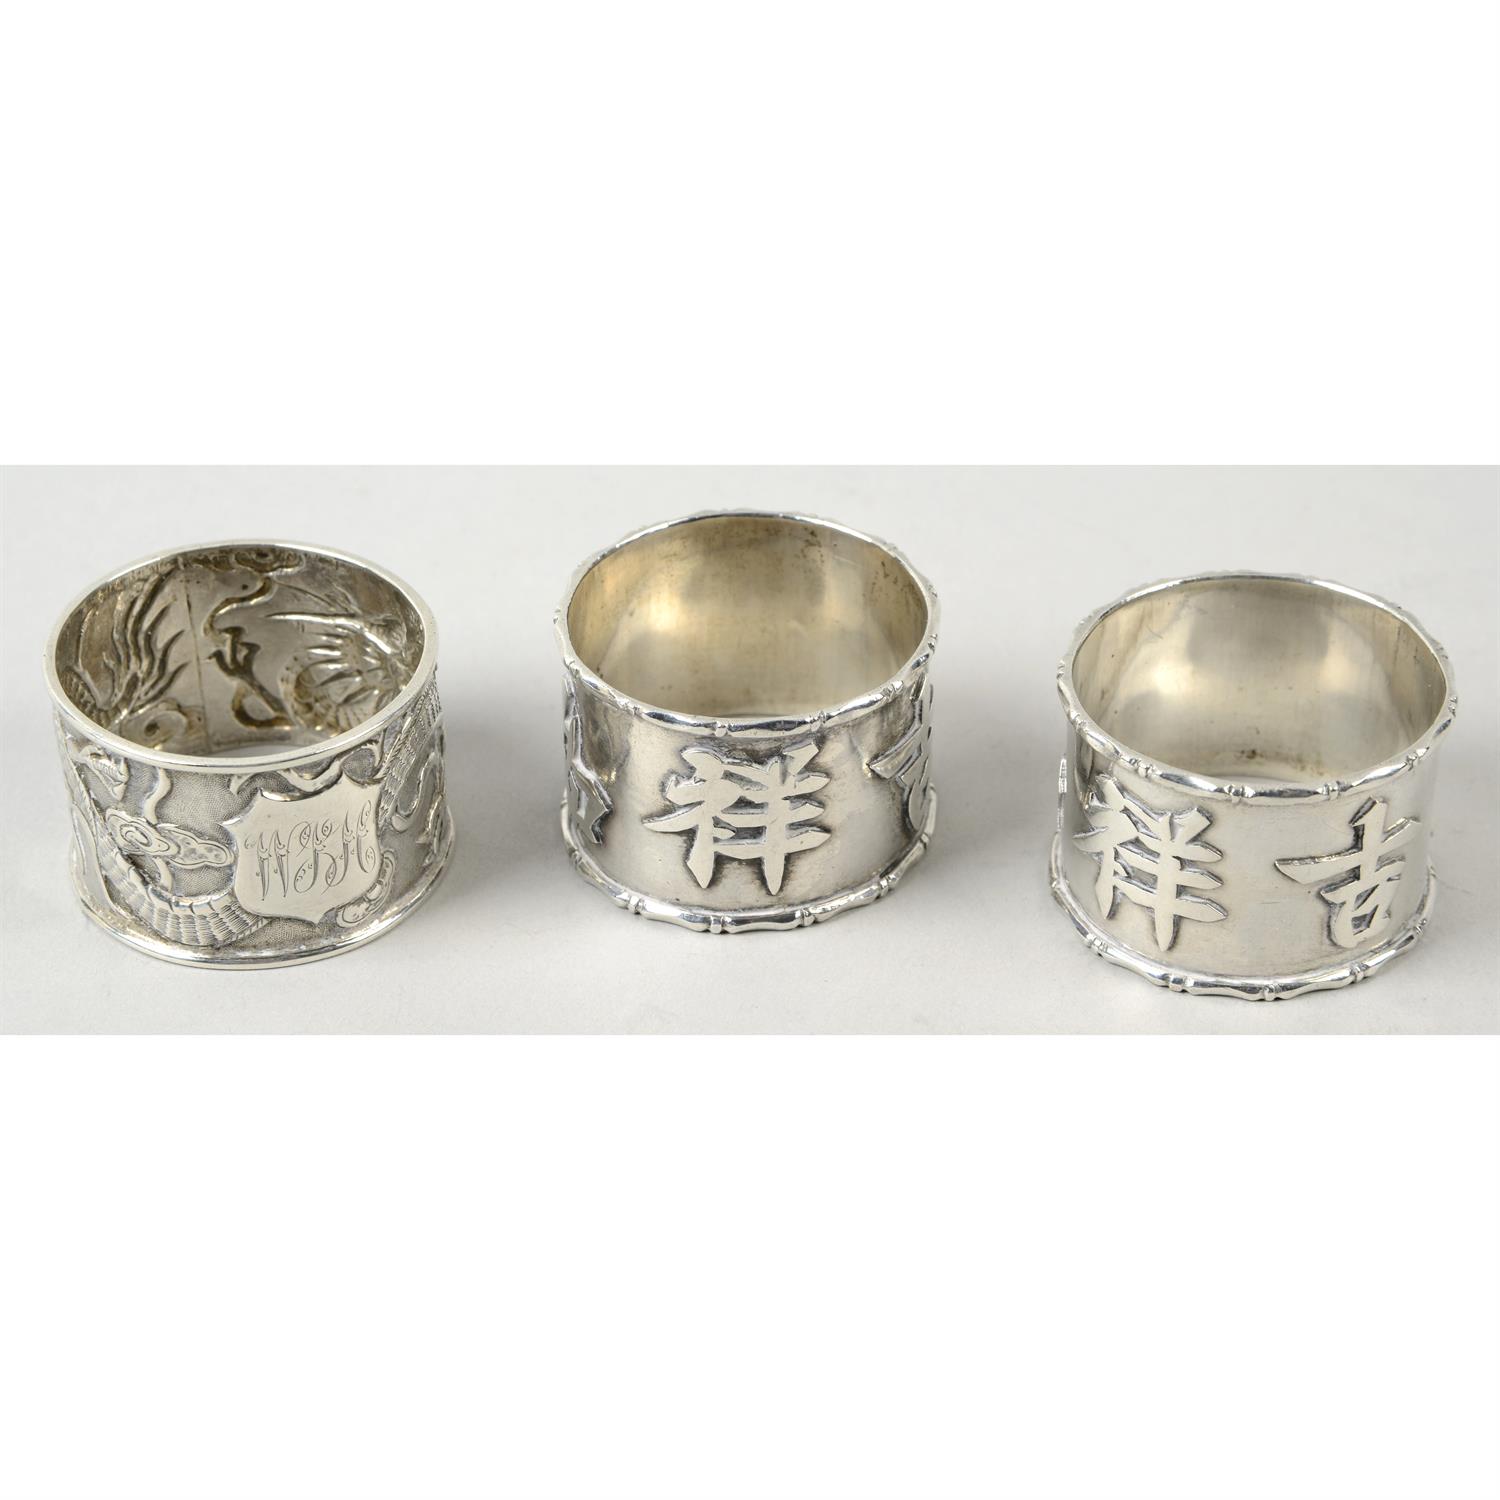 A Chinese export silver cruet set; together with three napkin rings. - Image 3 of 4